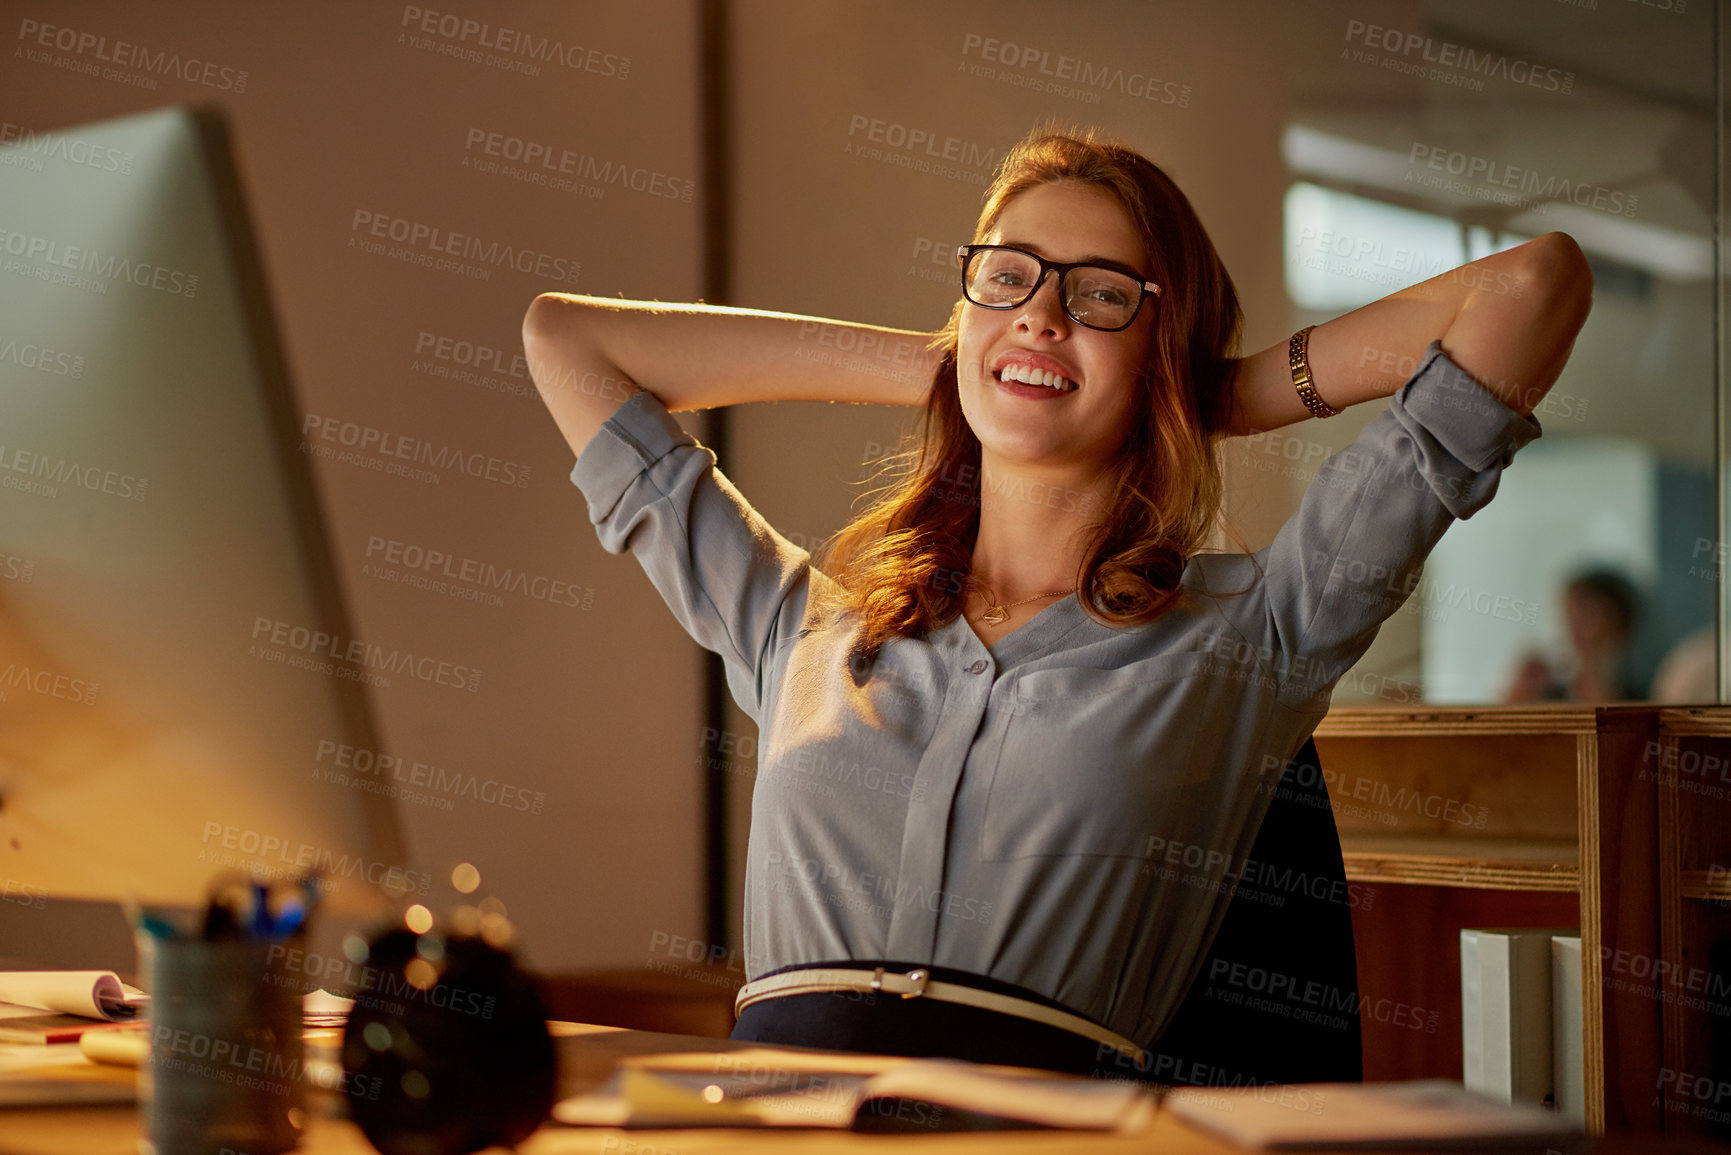 Buy stock photo Portrait of an attractive young businesswoman sitting with her hands behind her head in the office